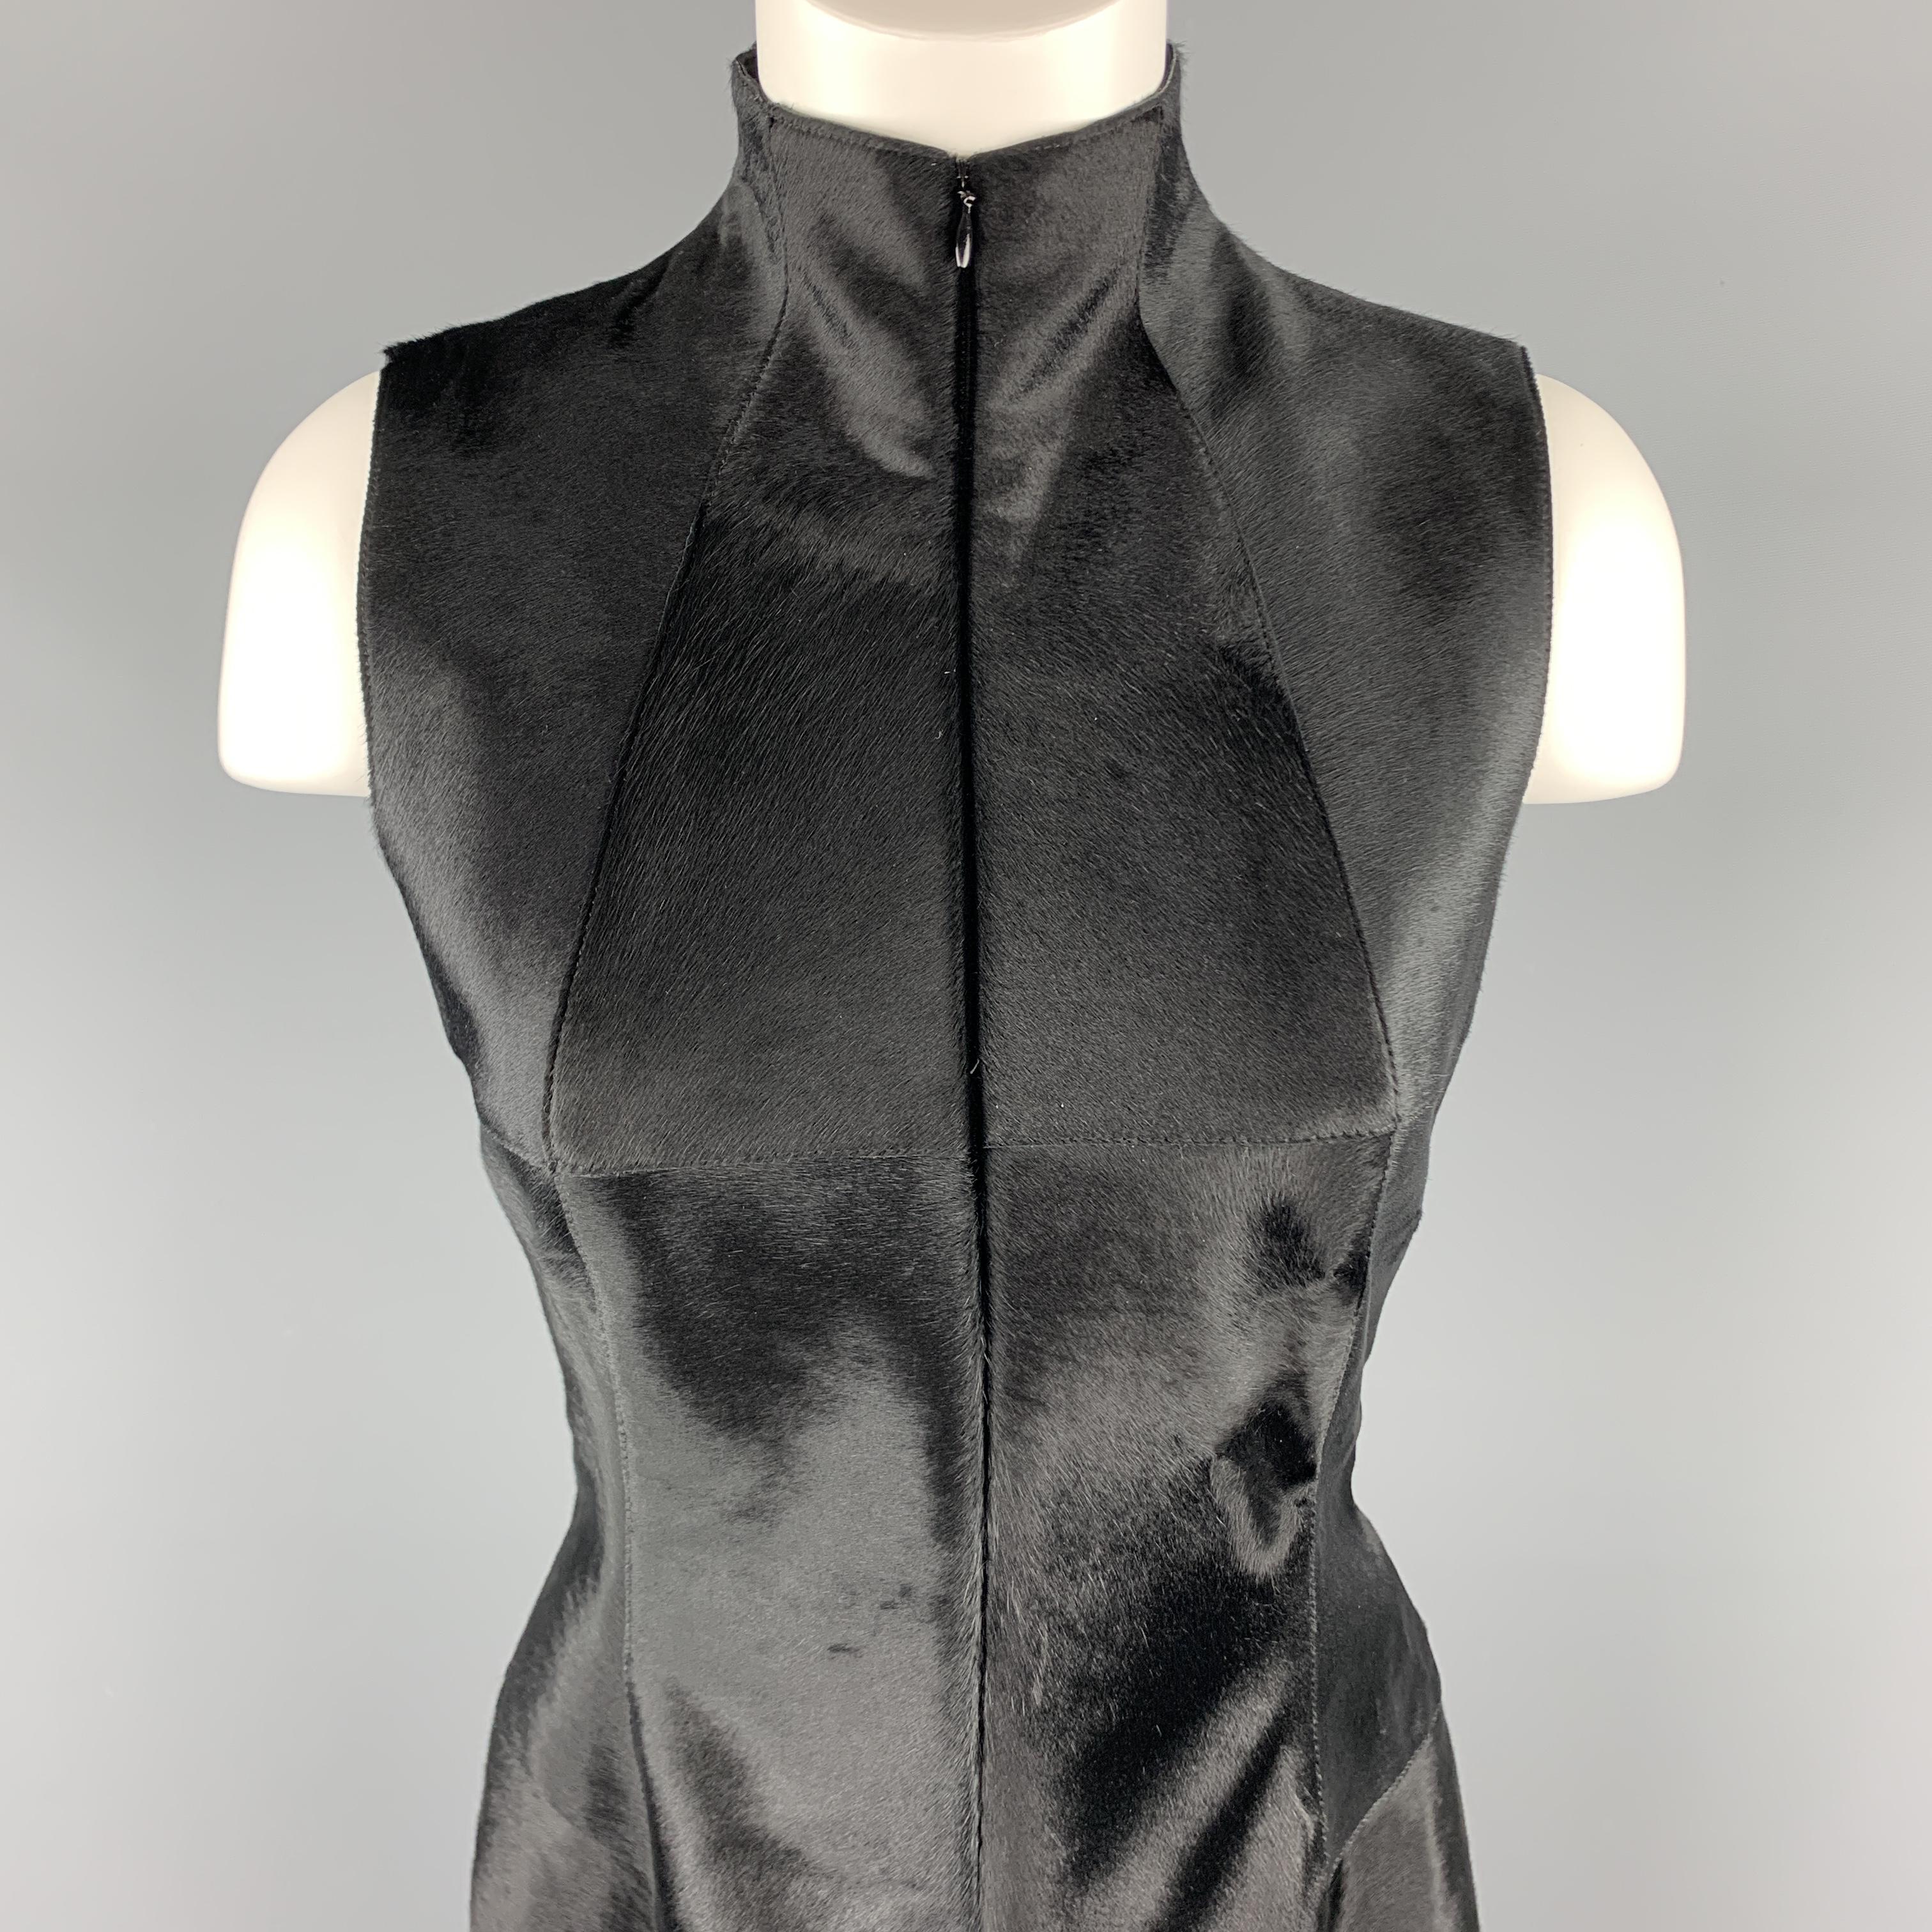 This gorgeous AKRIS shift dress comes in black pony hair leather with a high mock neck, hidden zip front, A line skirt, and stripe panel back with silk chiffon inset box pleats.

Excellent Pre-Owned Condition.
Marked: US 6

Measurements:

Shoulder: